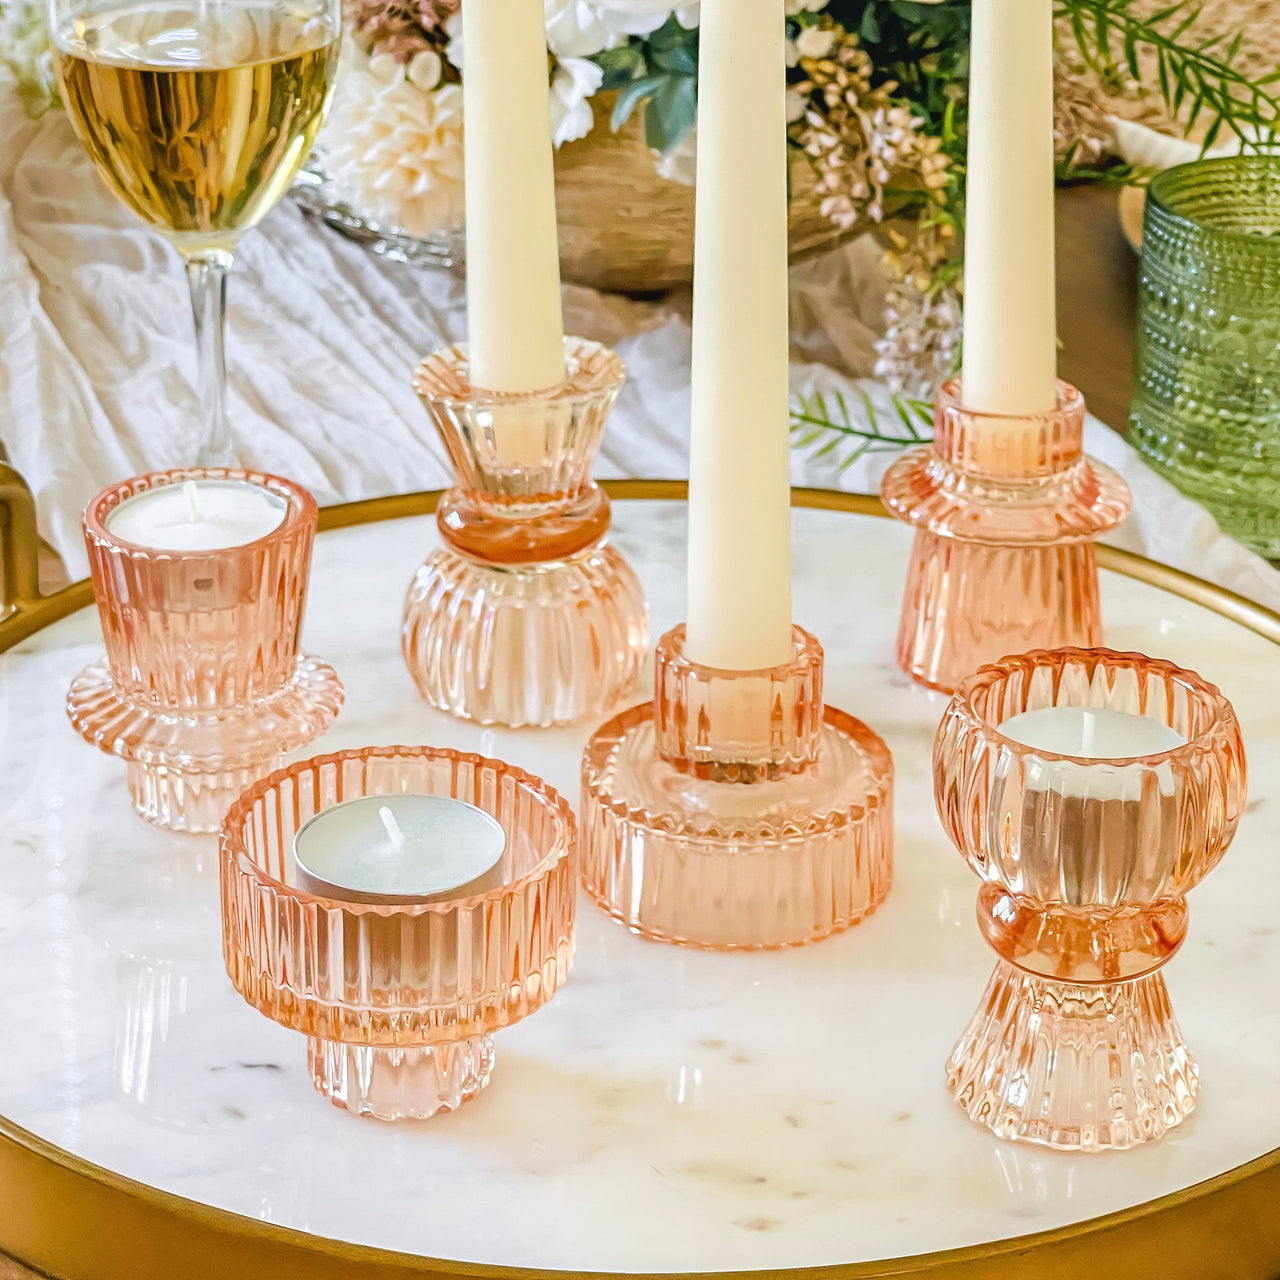 Pink Wine Glasses - A Feminime Touch